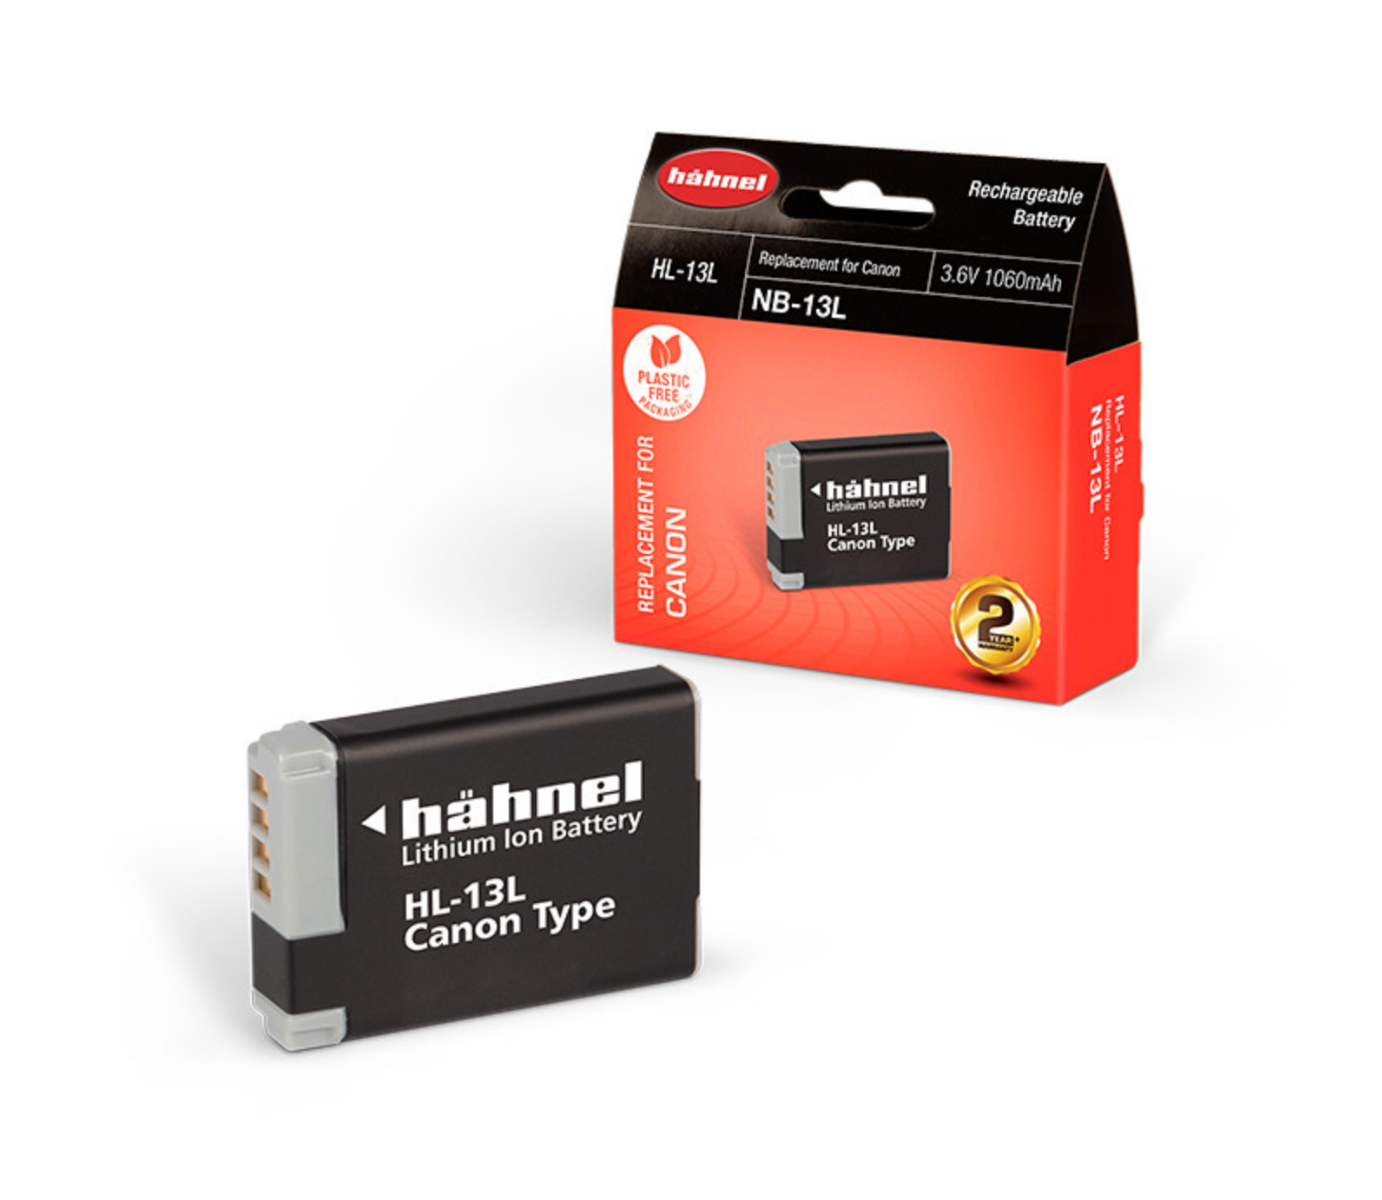 Product Image of Hahnel NB-13L Li-Ion Battery for Canon G1 X Mark III, G5 X, G7 X, G9 X, and others